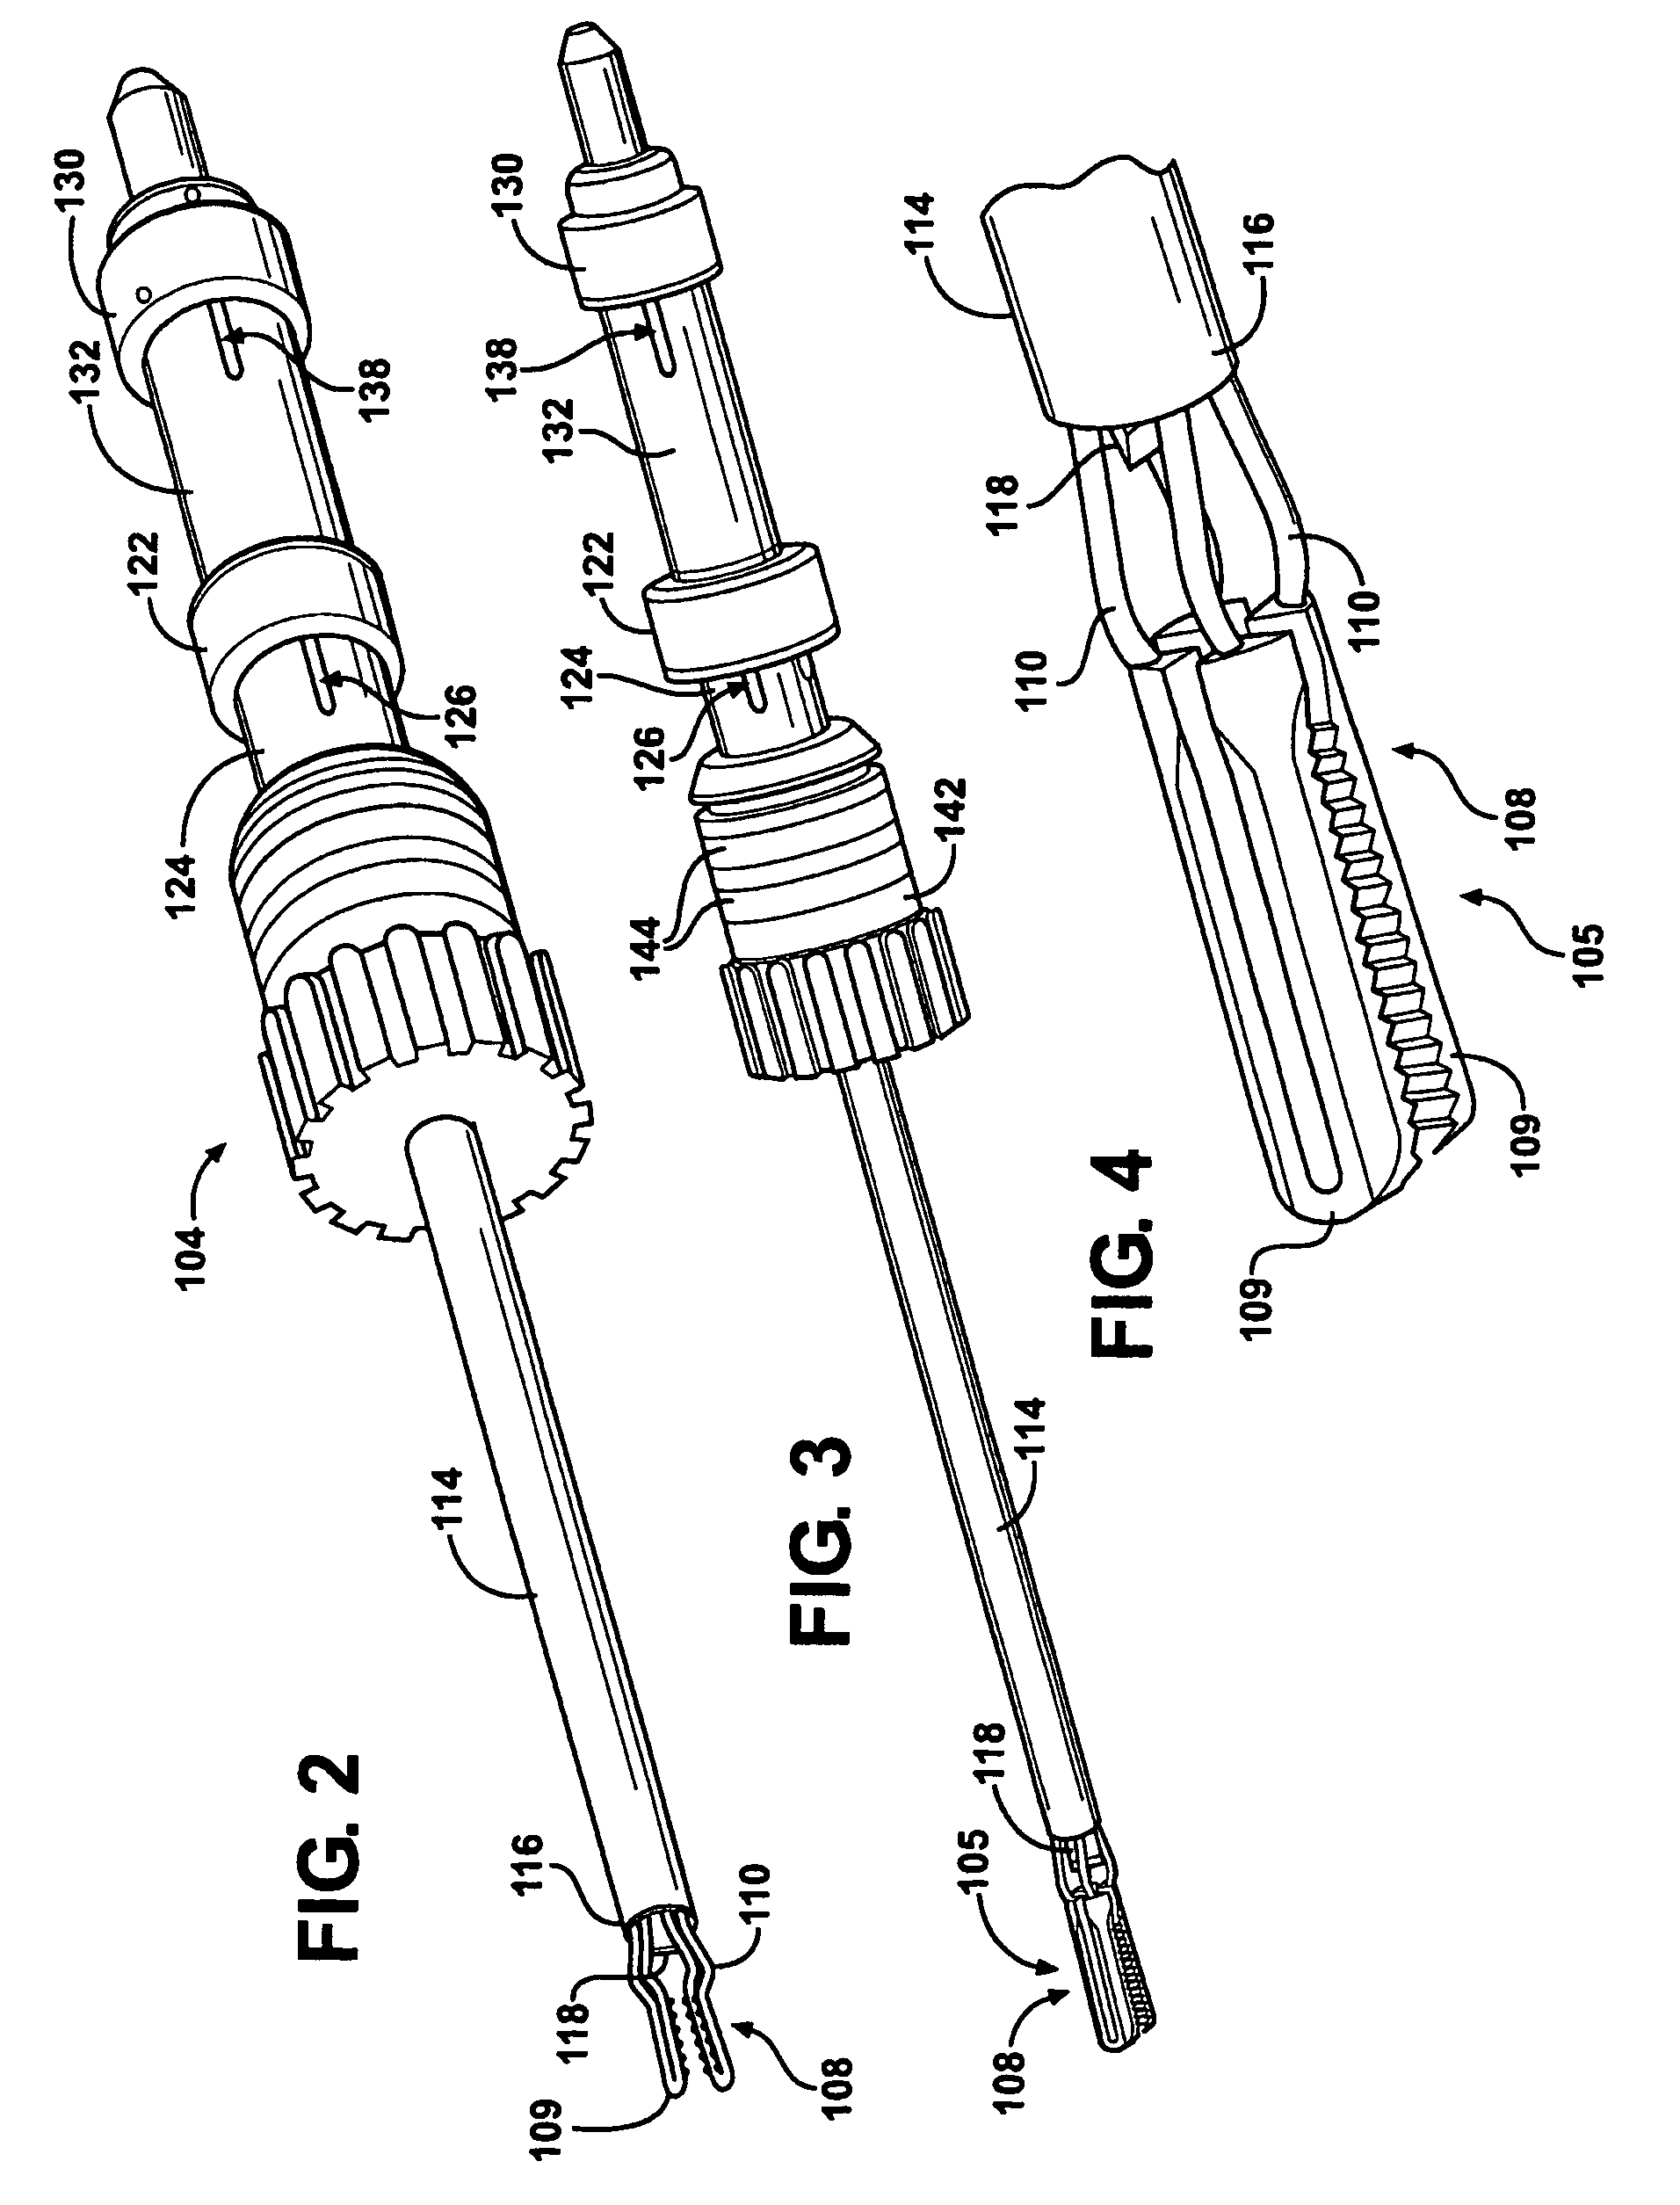 Surgical apparatus with removable tool cartridge